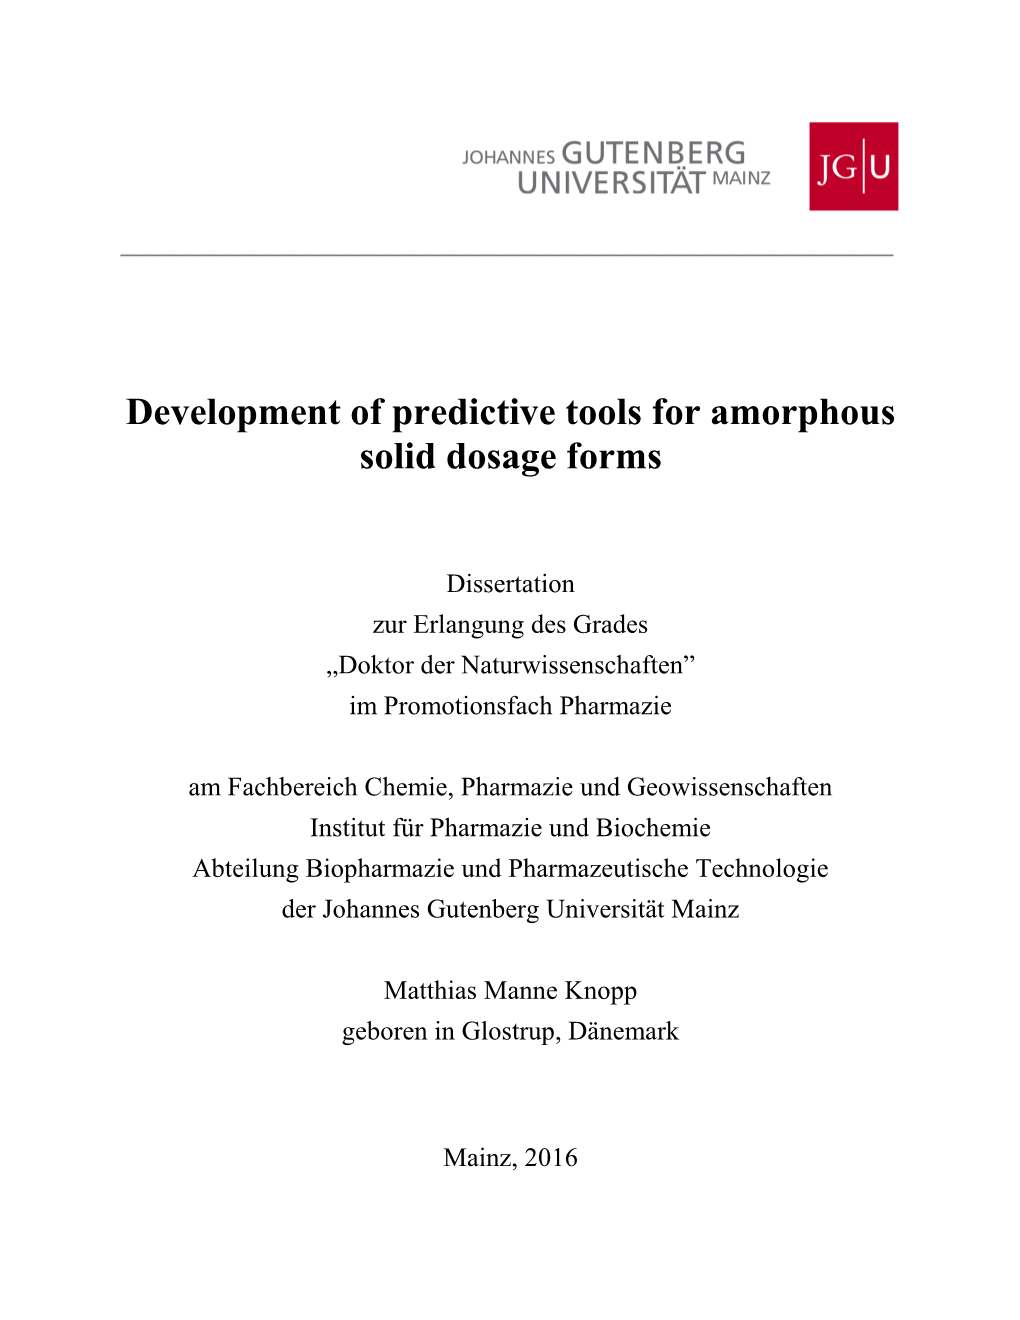 Development of Predictive Tools for Amorphous Solid Dosage Forms